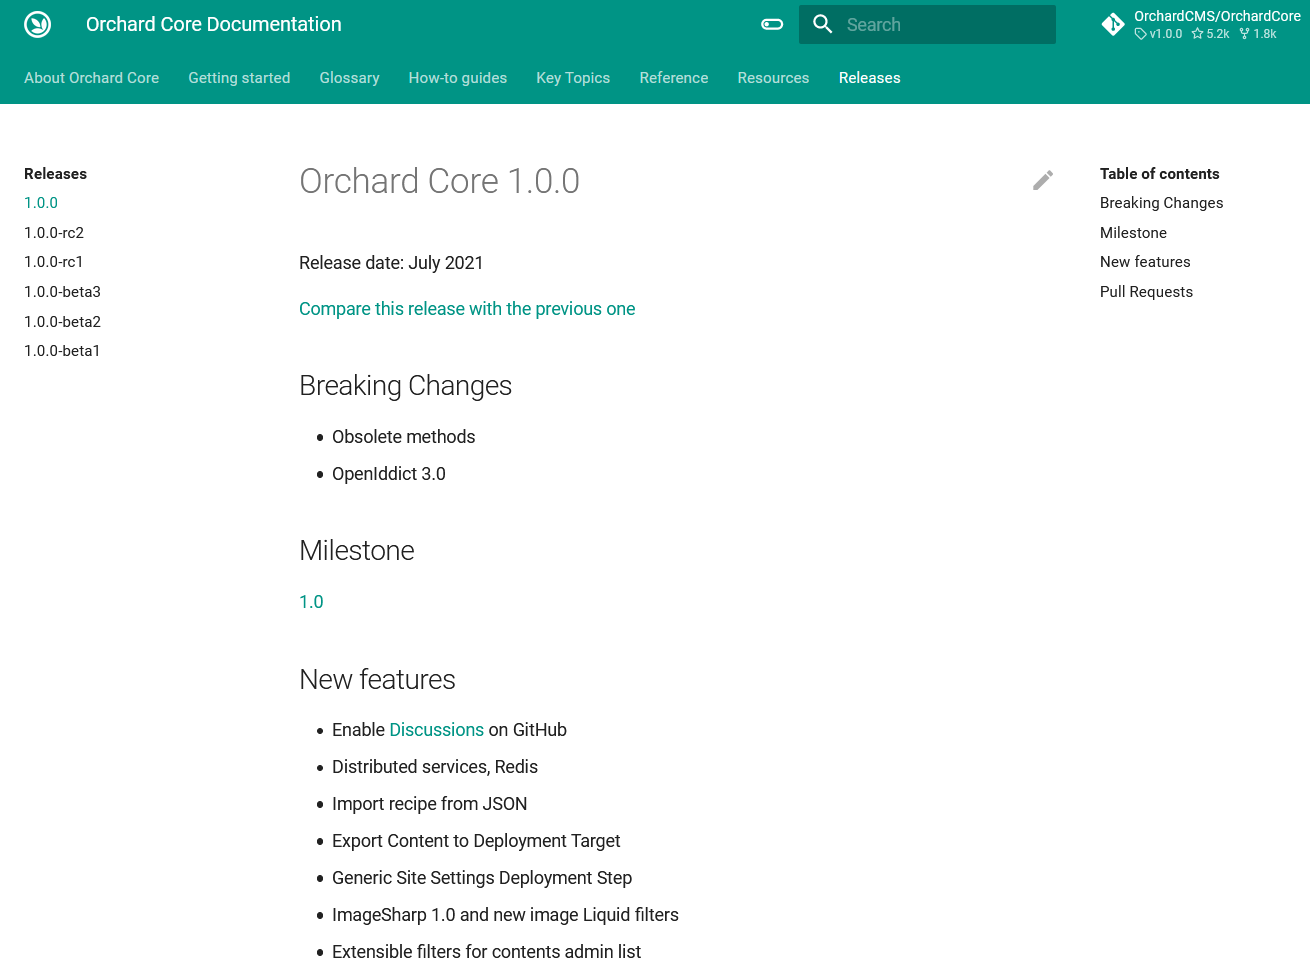 The Releases page on the Orchard Core Documentation site